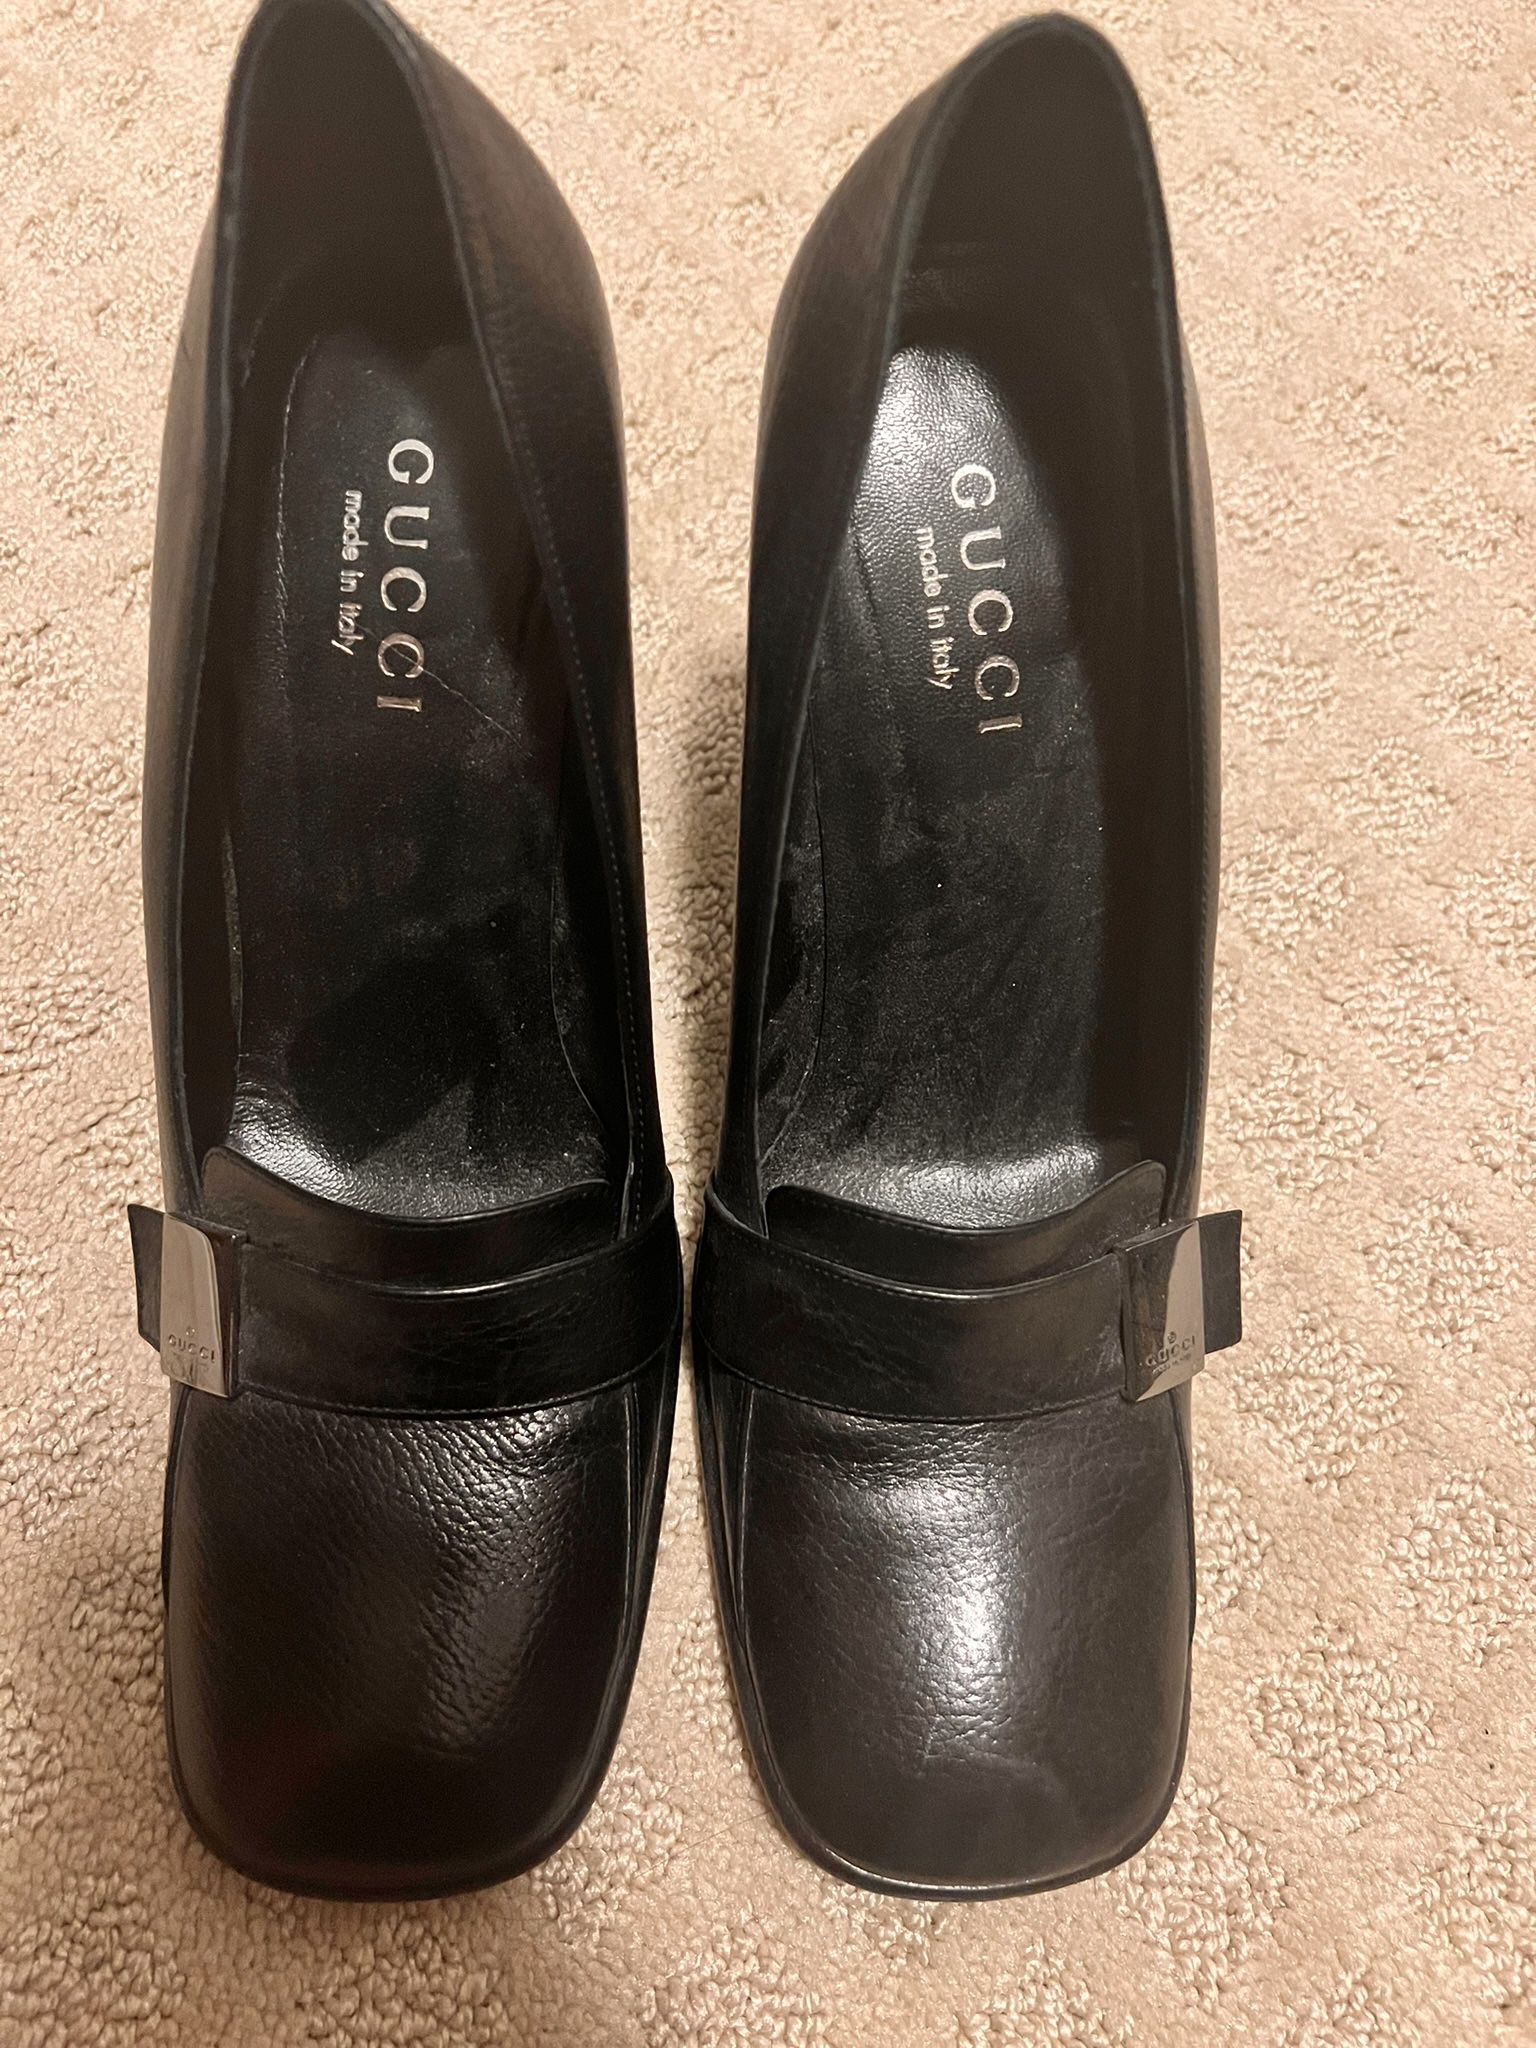 Gucci black leather pumps in great condition